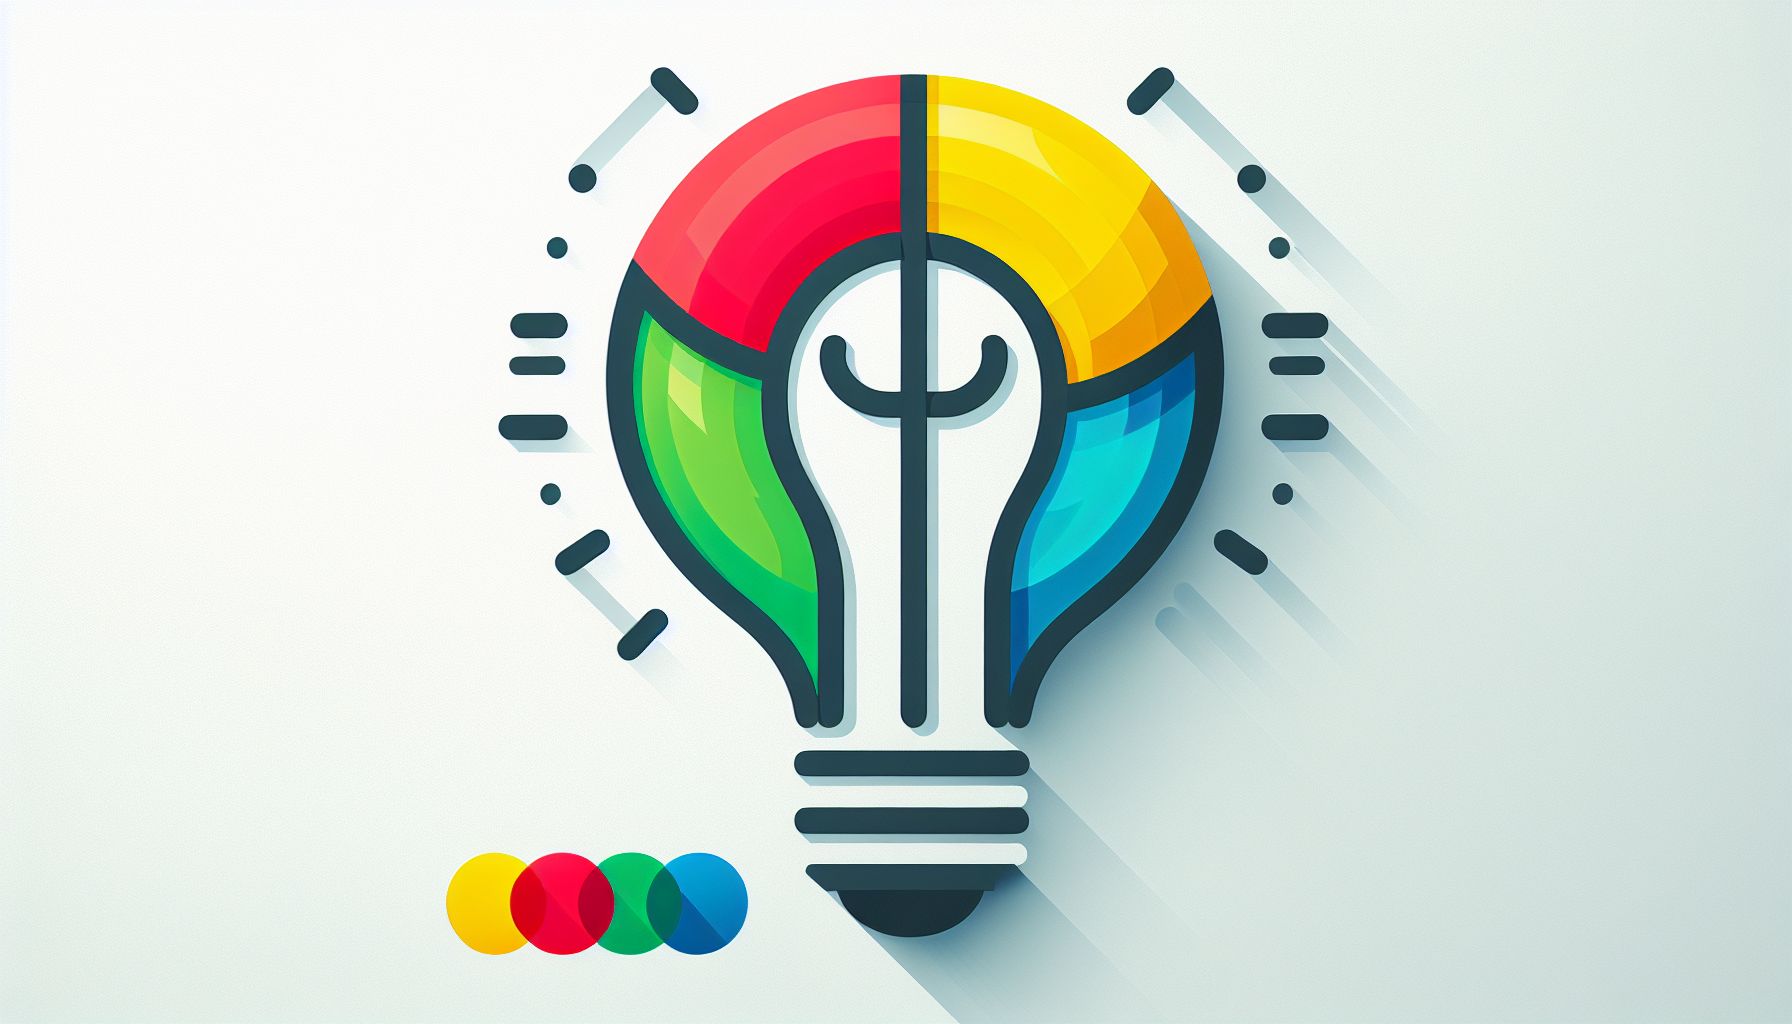 Light bulb in flat illustration style and white background, red #f47574, green #88c7a8, yellow #fcc44b, and blue #645bc8 colors.